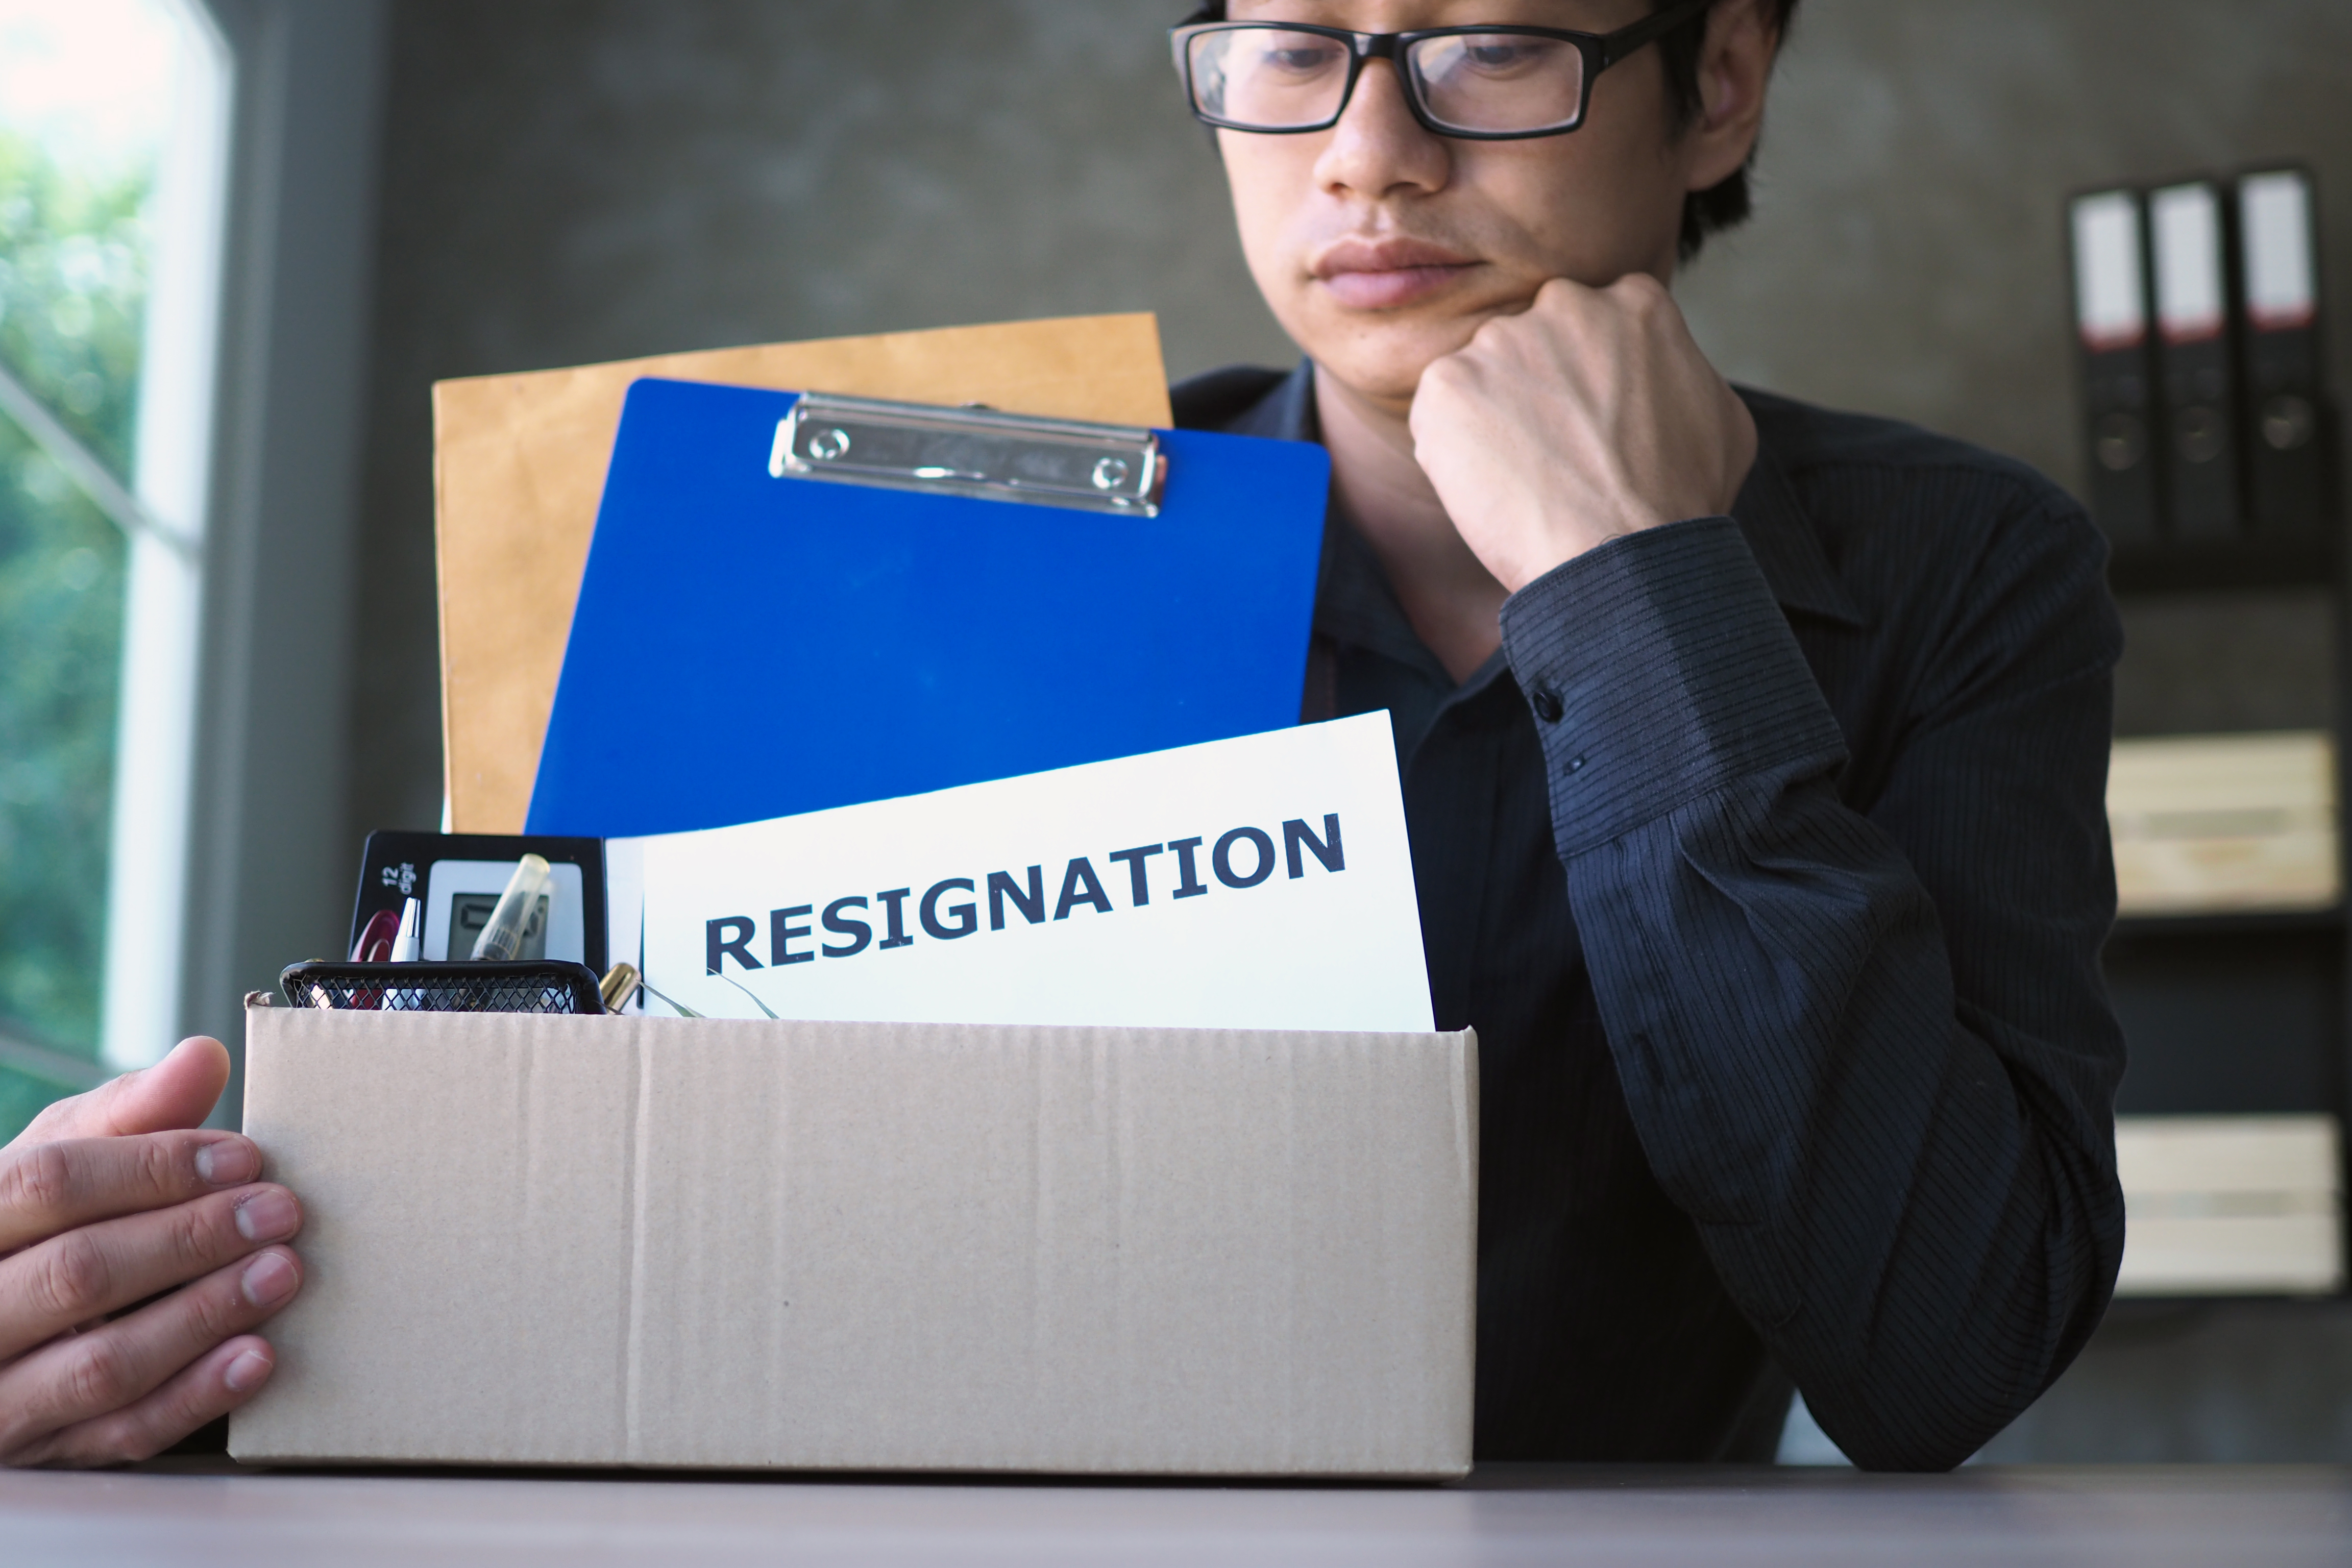 A man is feeling frustrated with the resignation letter